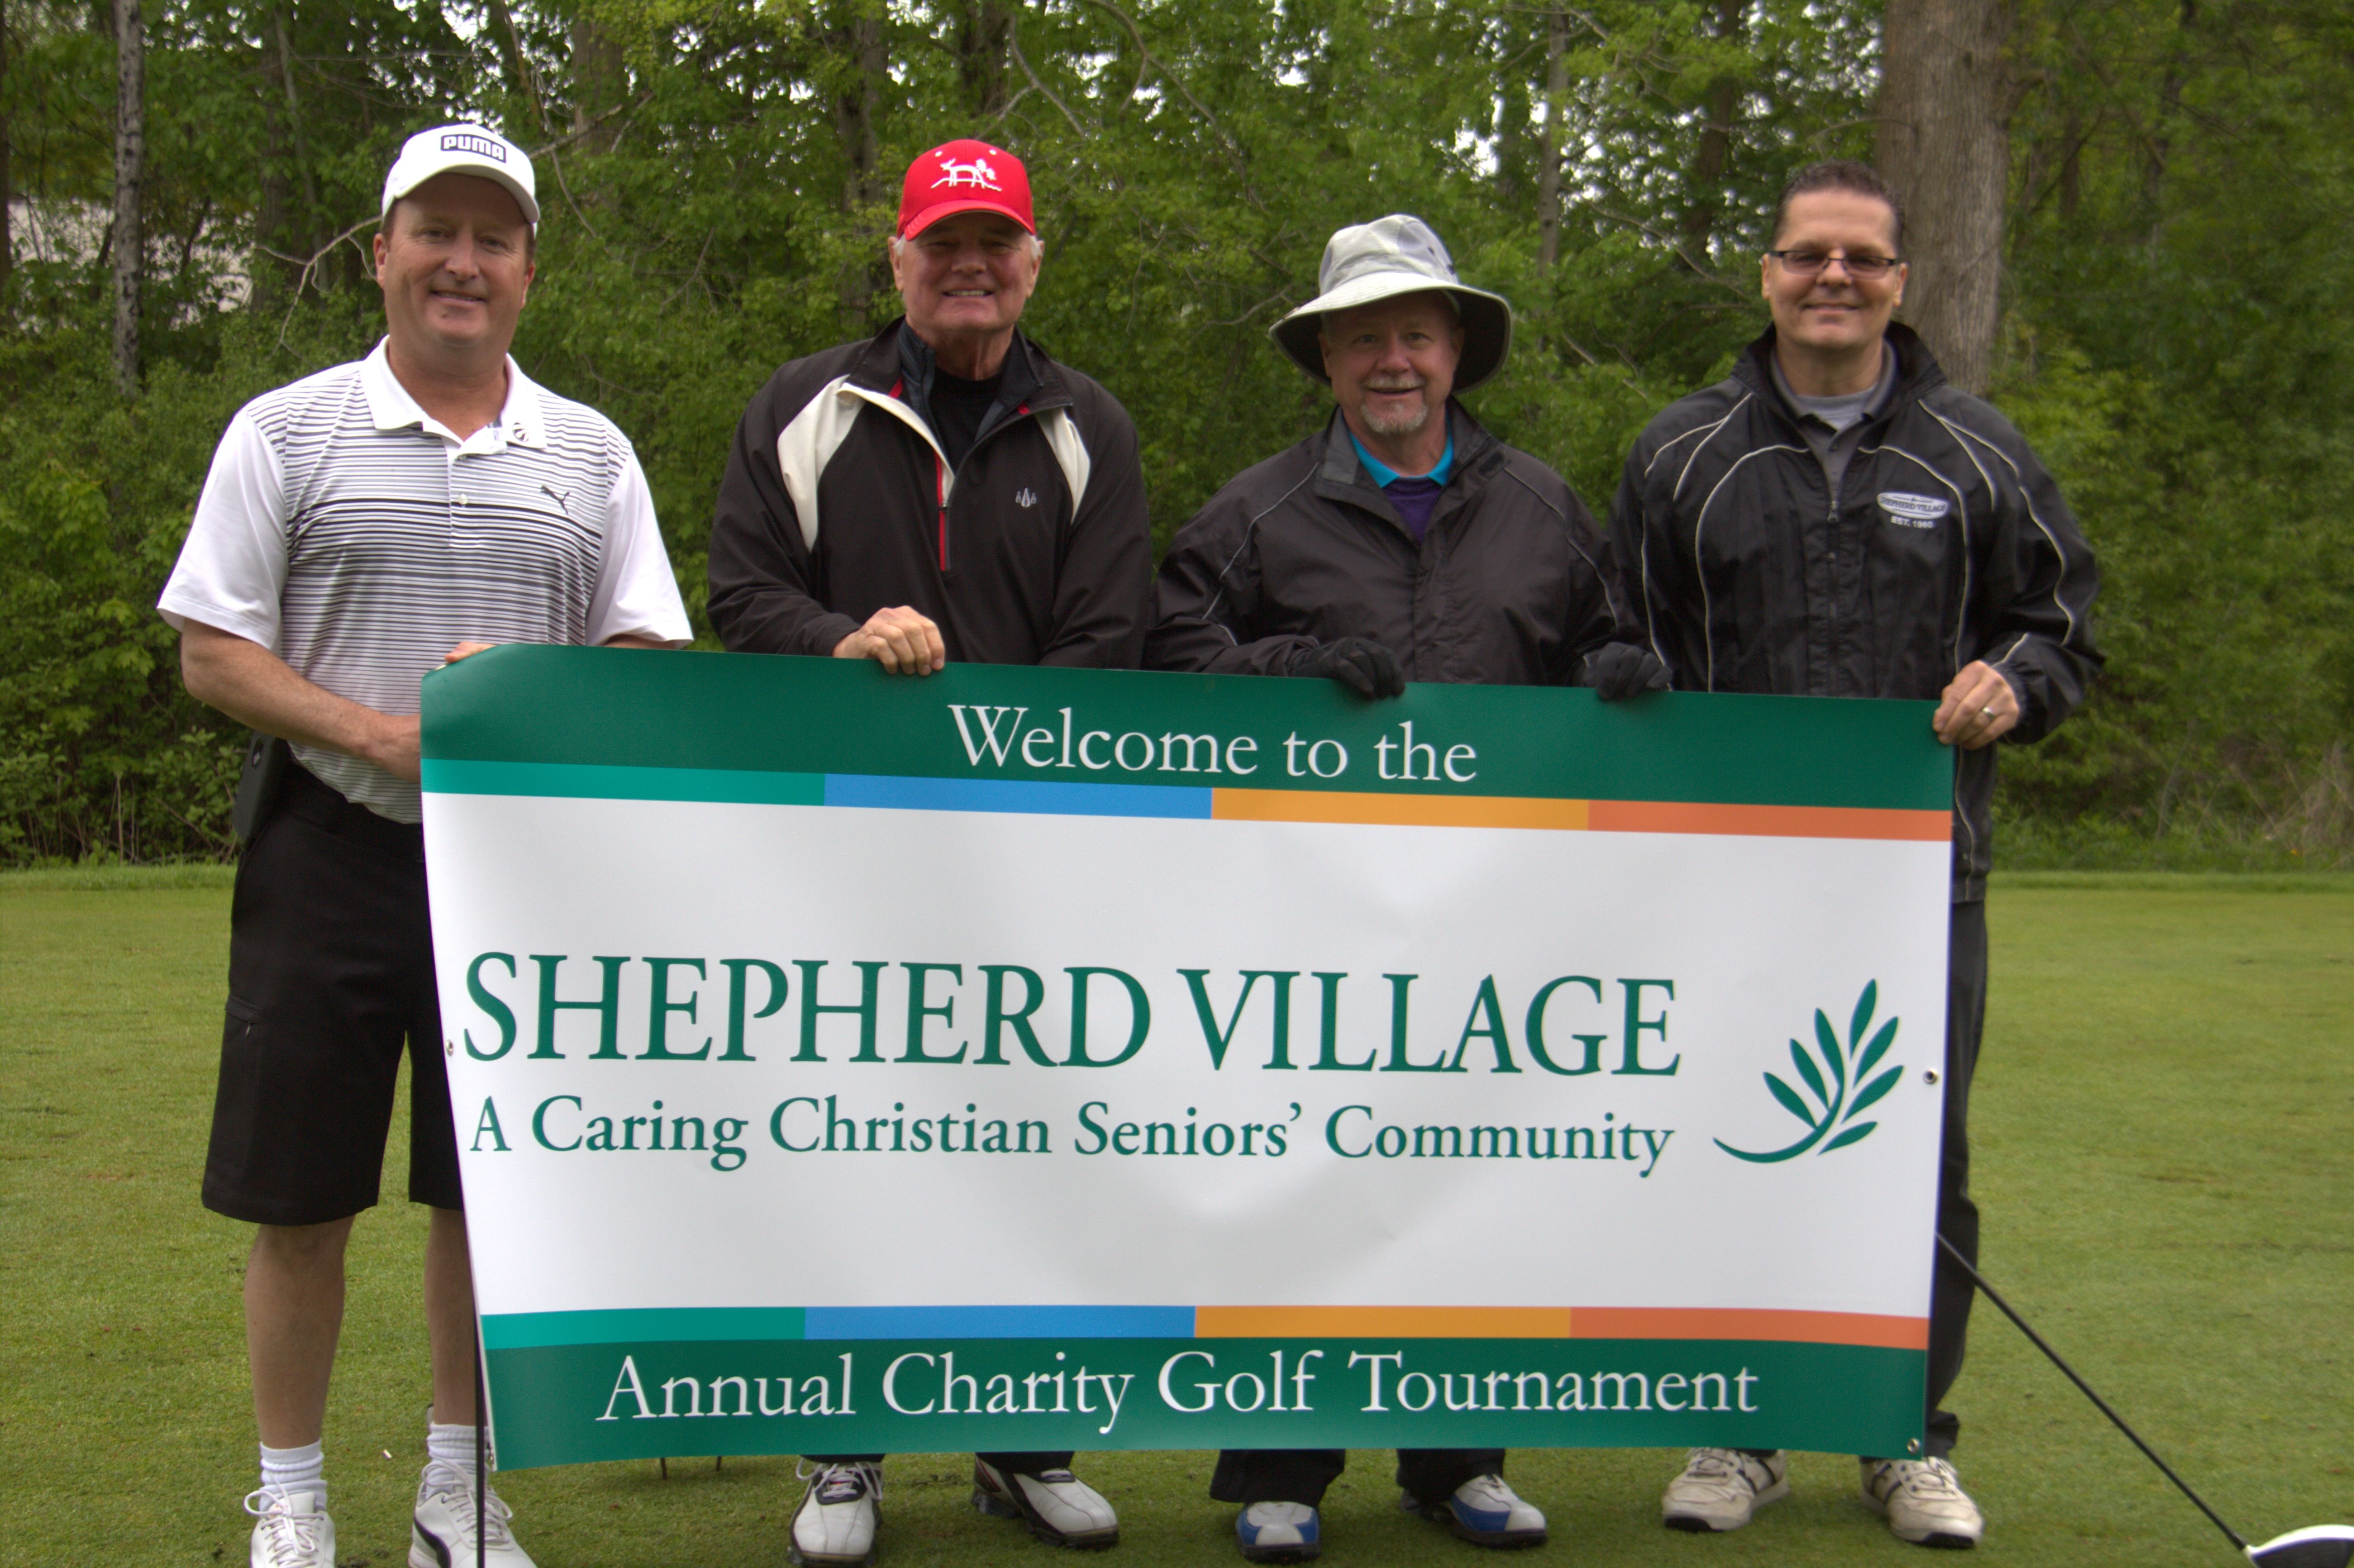 Welcome to the Shepherd Village, A caring Christian Seniors' Community - Annual Charity Golf Tournament